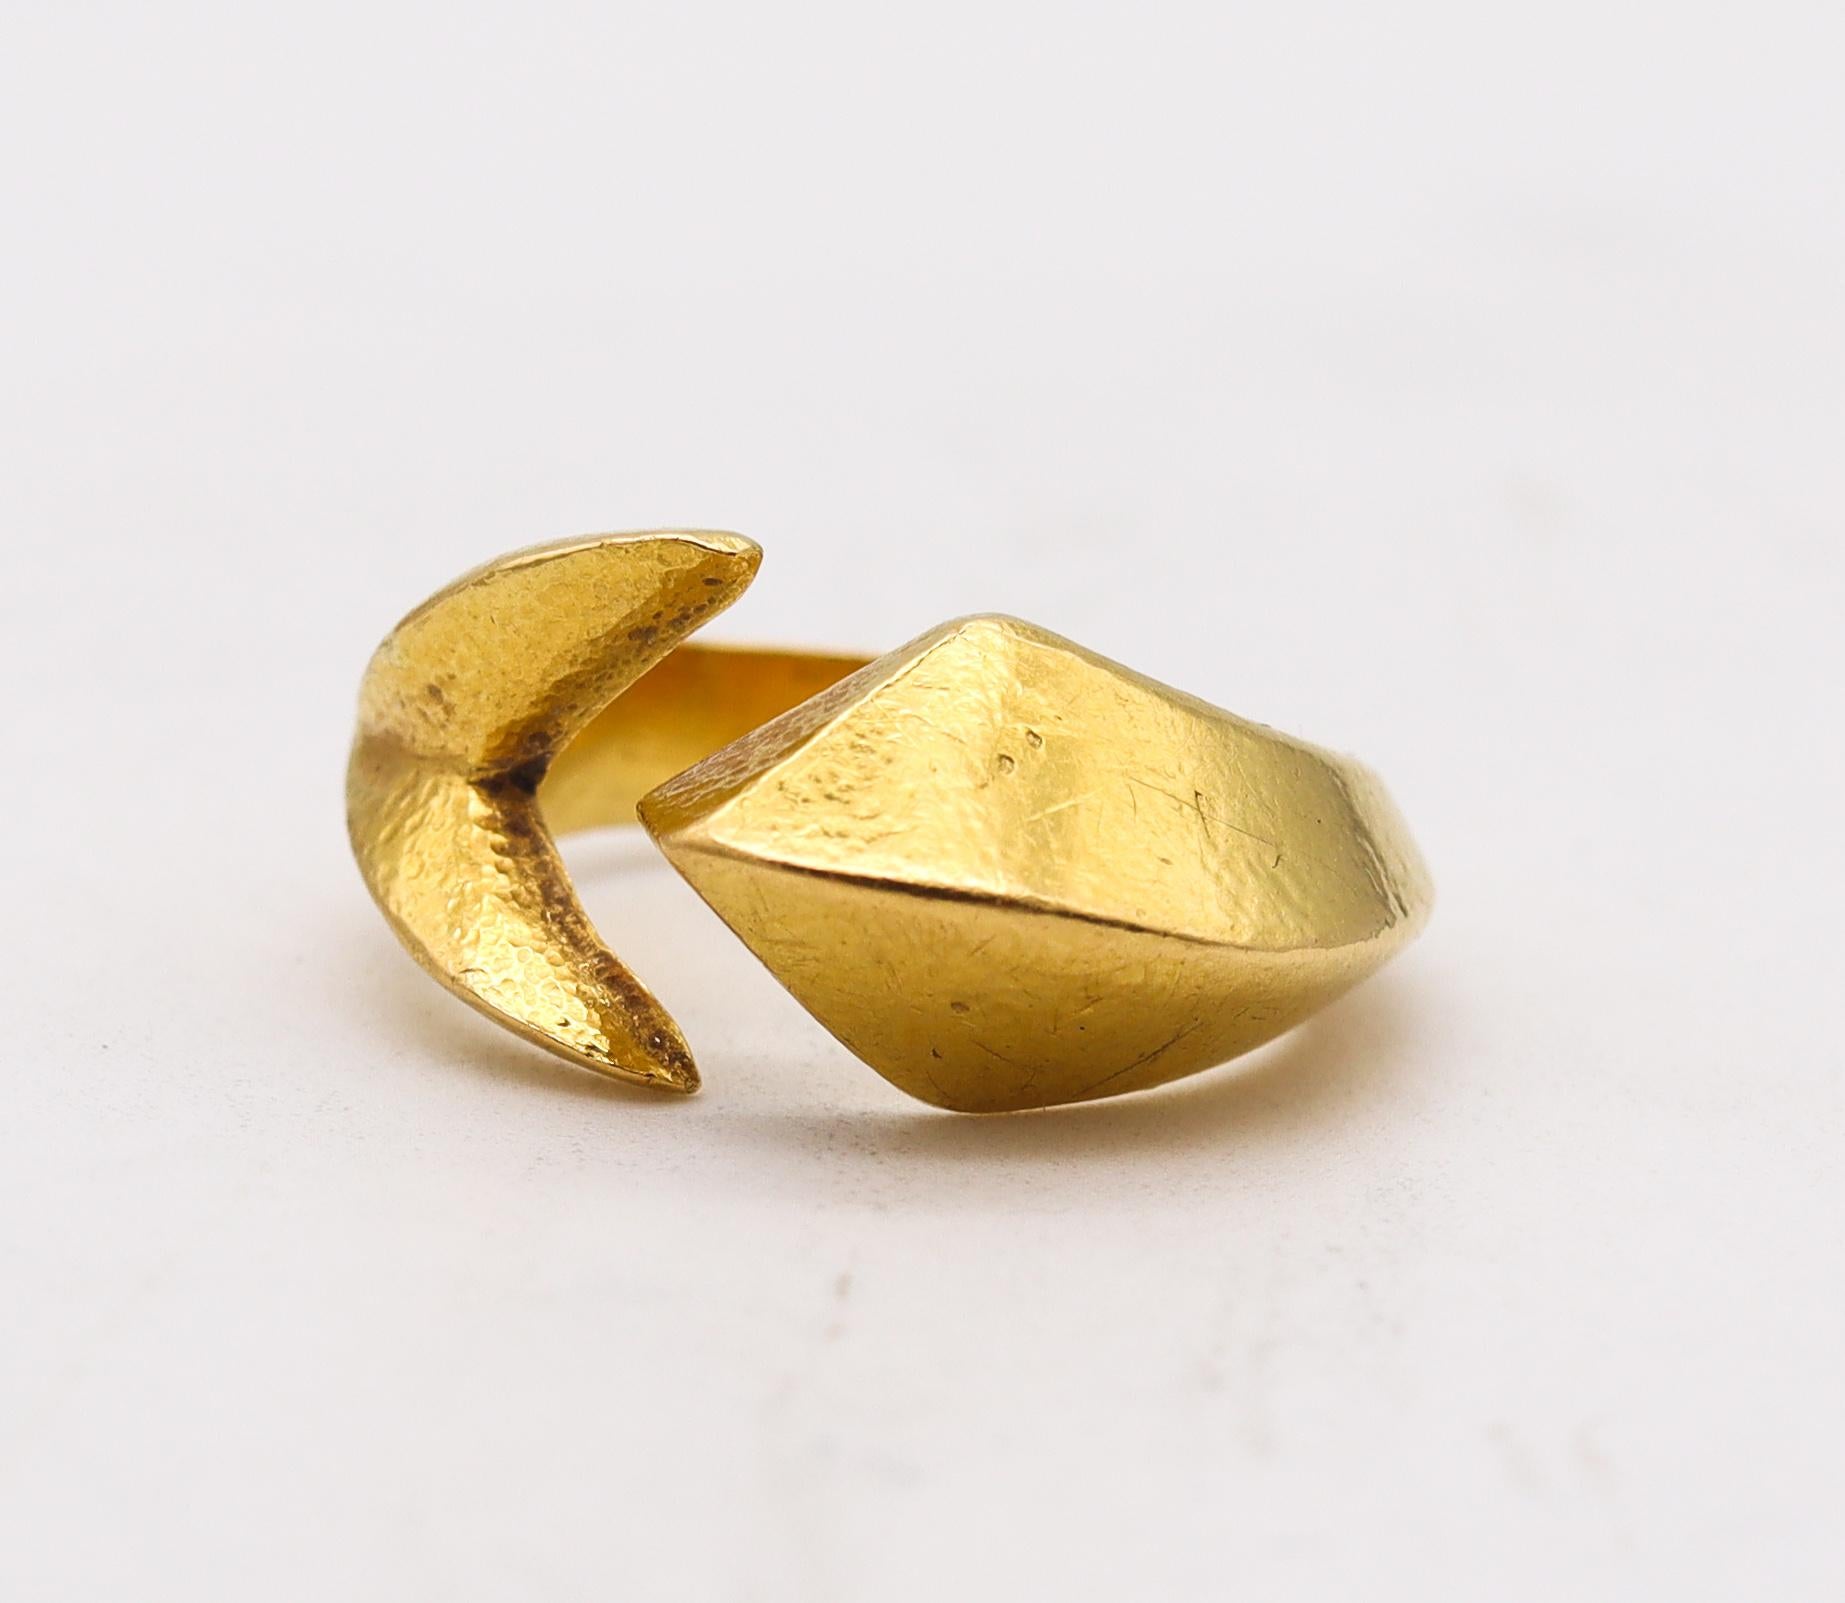 Gothic Revival Lalaounis 1970 Geometric Open Work Paleolithic Ring in Battered 22Kt Yellow Gold